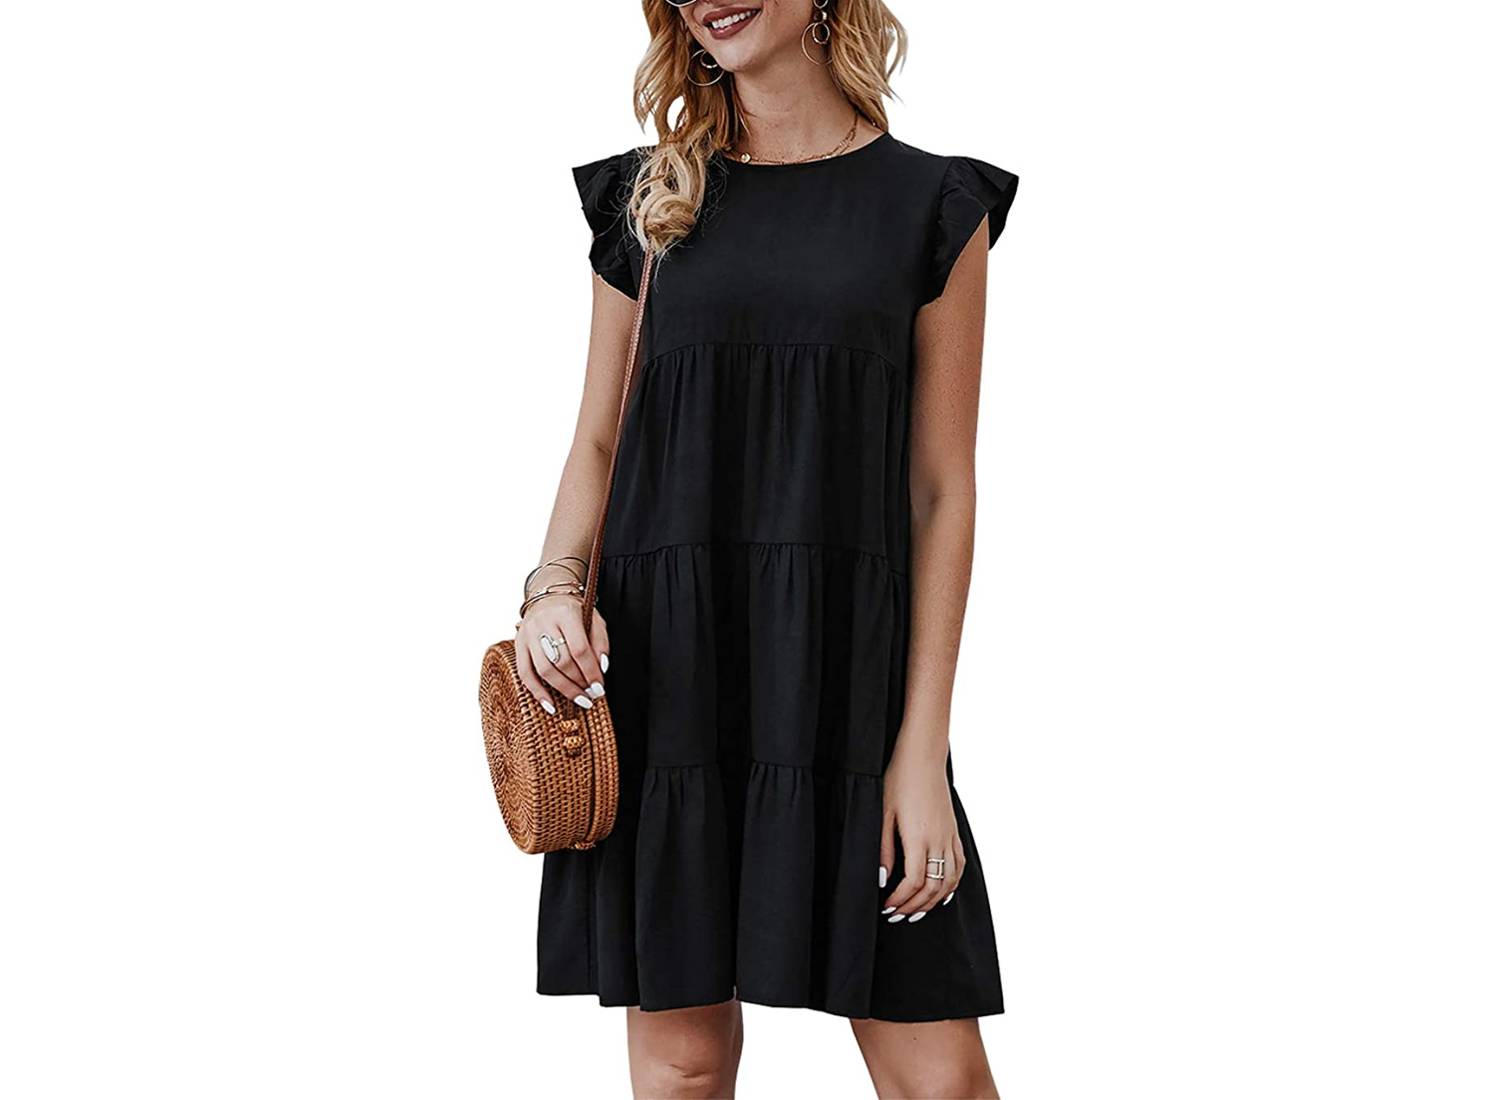 Woman wearing black sleeveless tiered sundress and brown purse